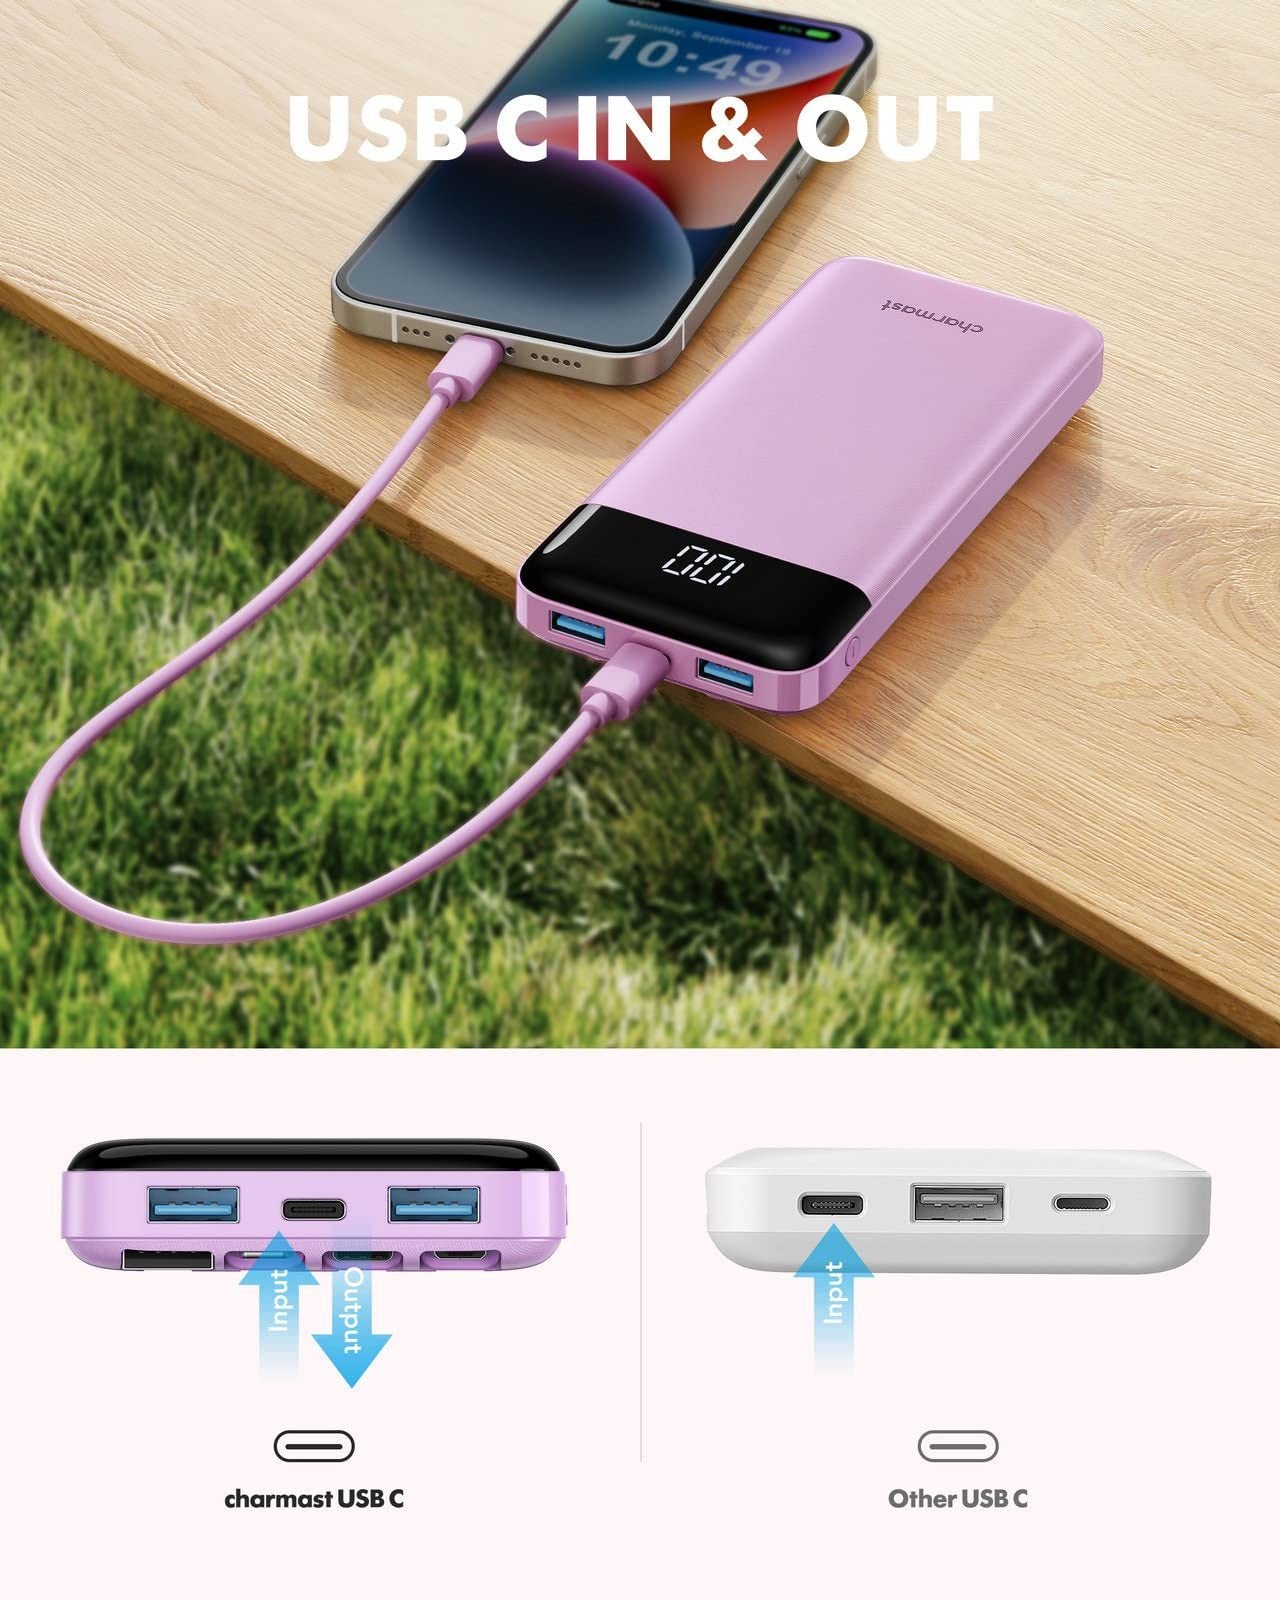 Portable Charger with Built in Cables, Portable Charger with Cords Wires Slim 10000mAh Travel Essentials Battery Pack 6 Outputs 3A High Speed Power Bank for iPhone Samsung Pixel LG Moto iPad